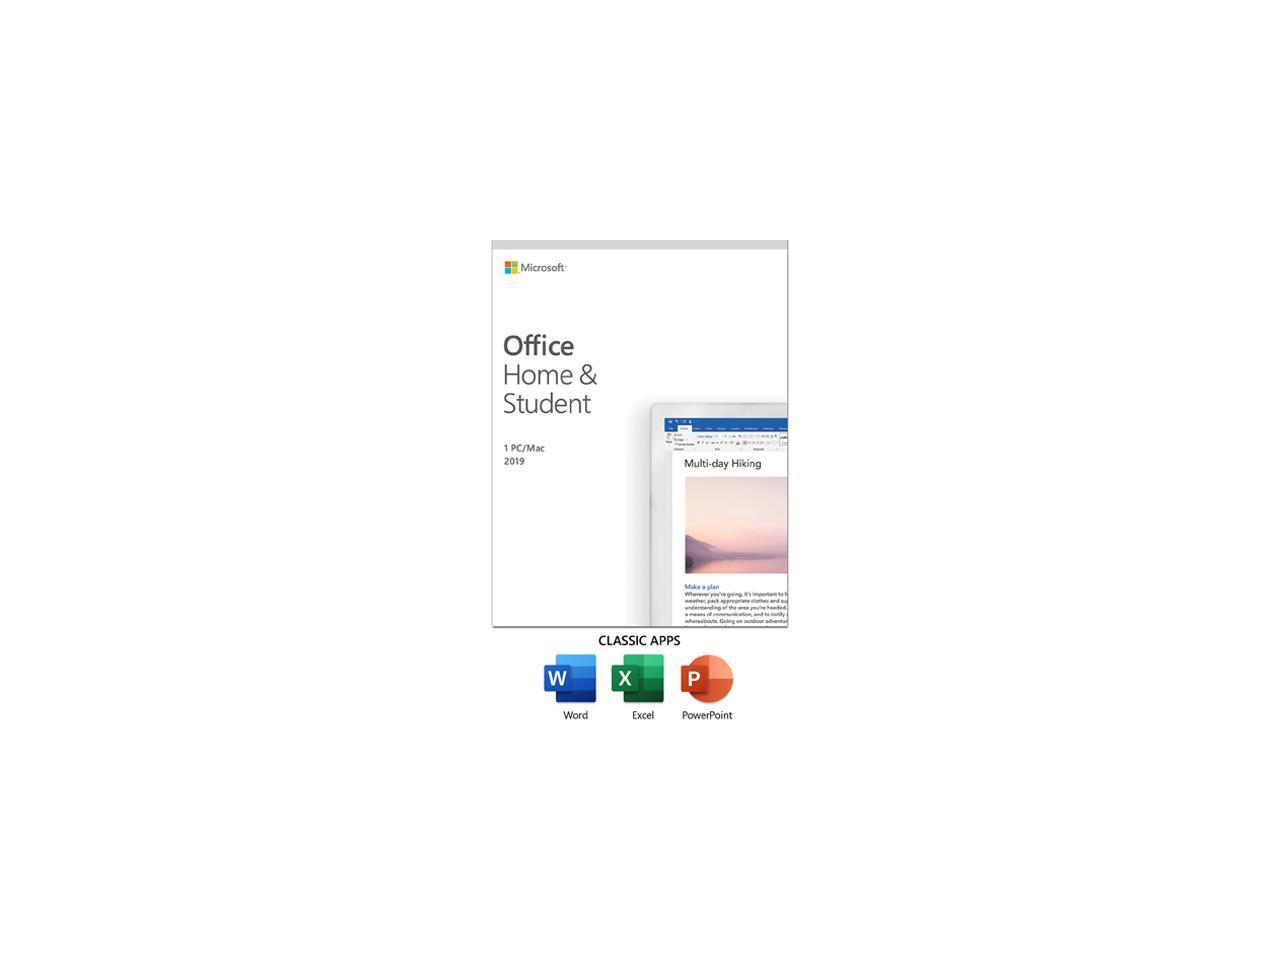 office home & student 2016 for mac for multiple computers